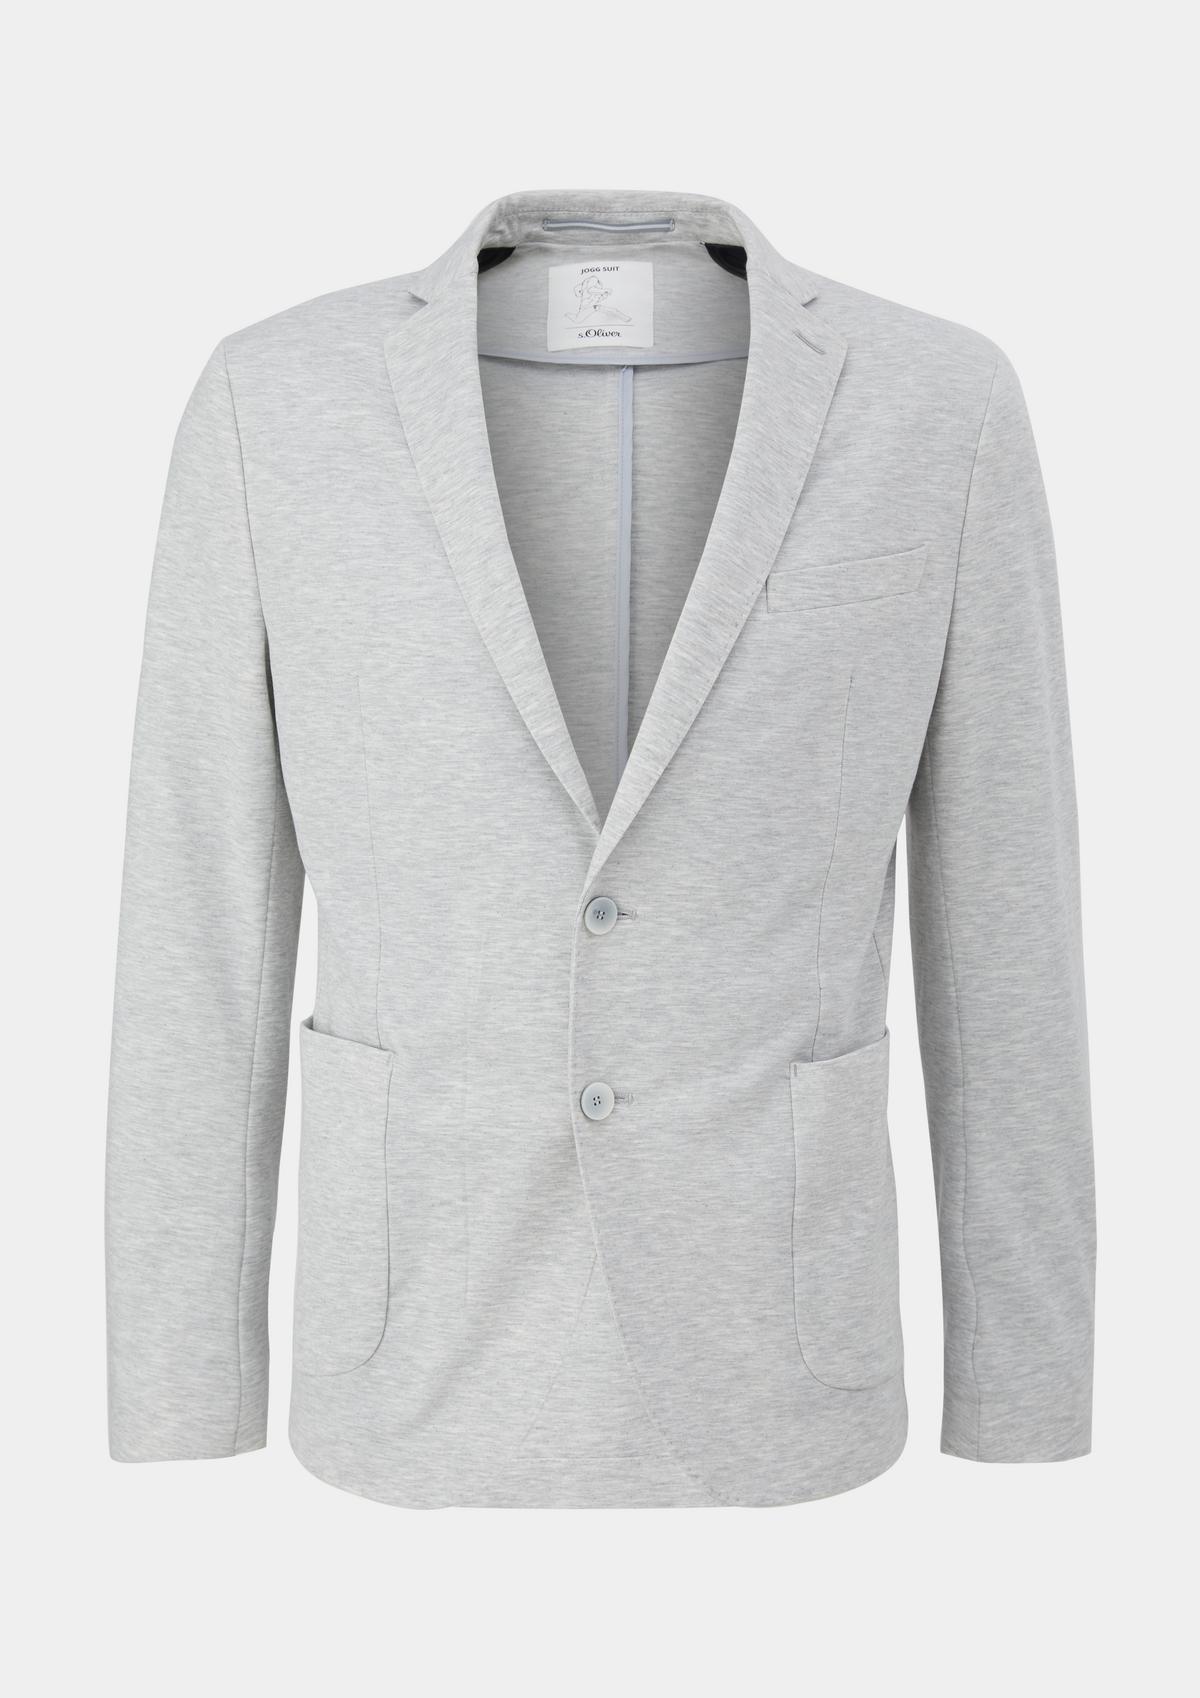 s.Oliver Slim fit: Tracksuit fabric jacket made of stretch jersey